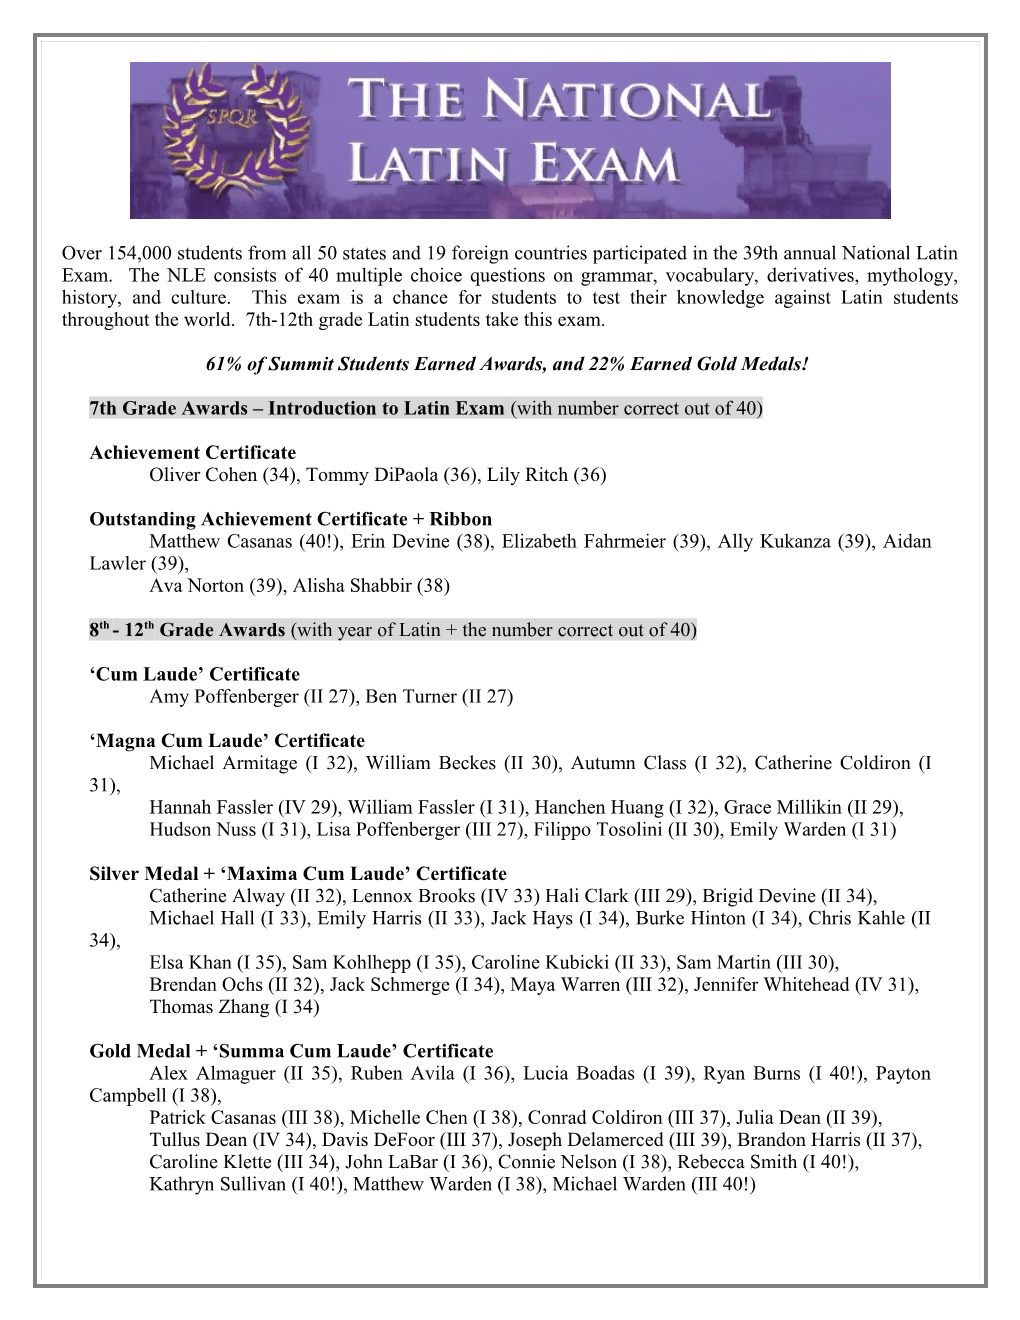 Results of the National Latin Exam